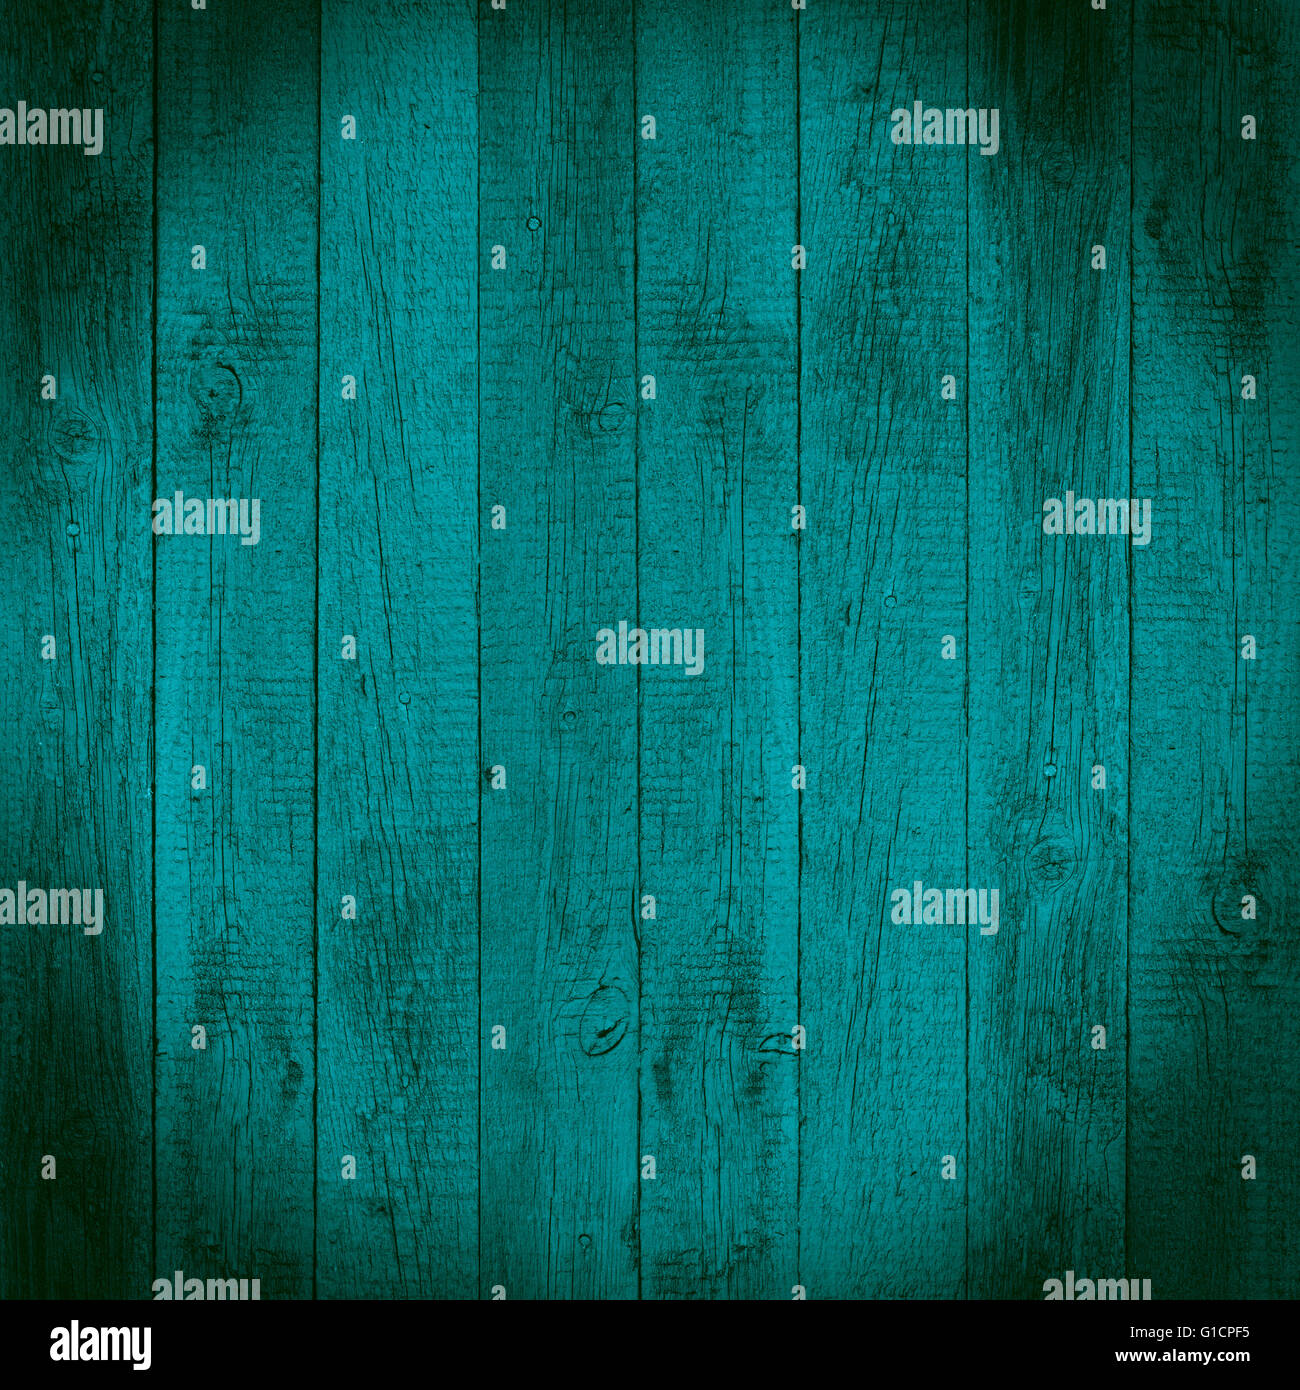 turquoise wooden background or wood grain texture Stock Photo